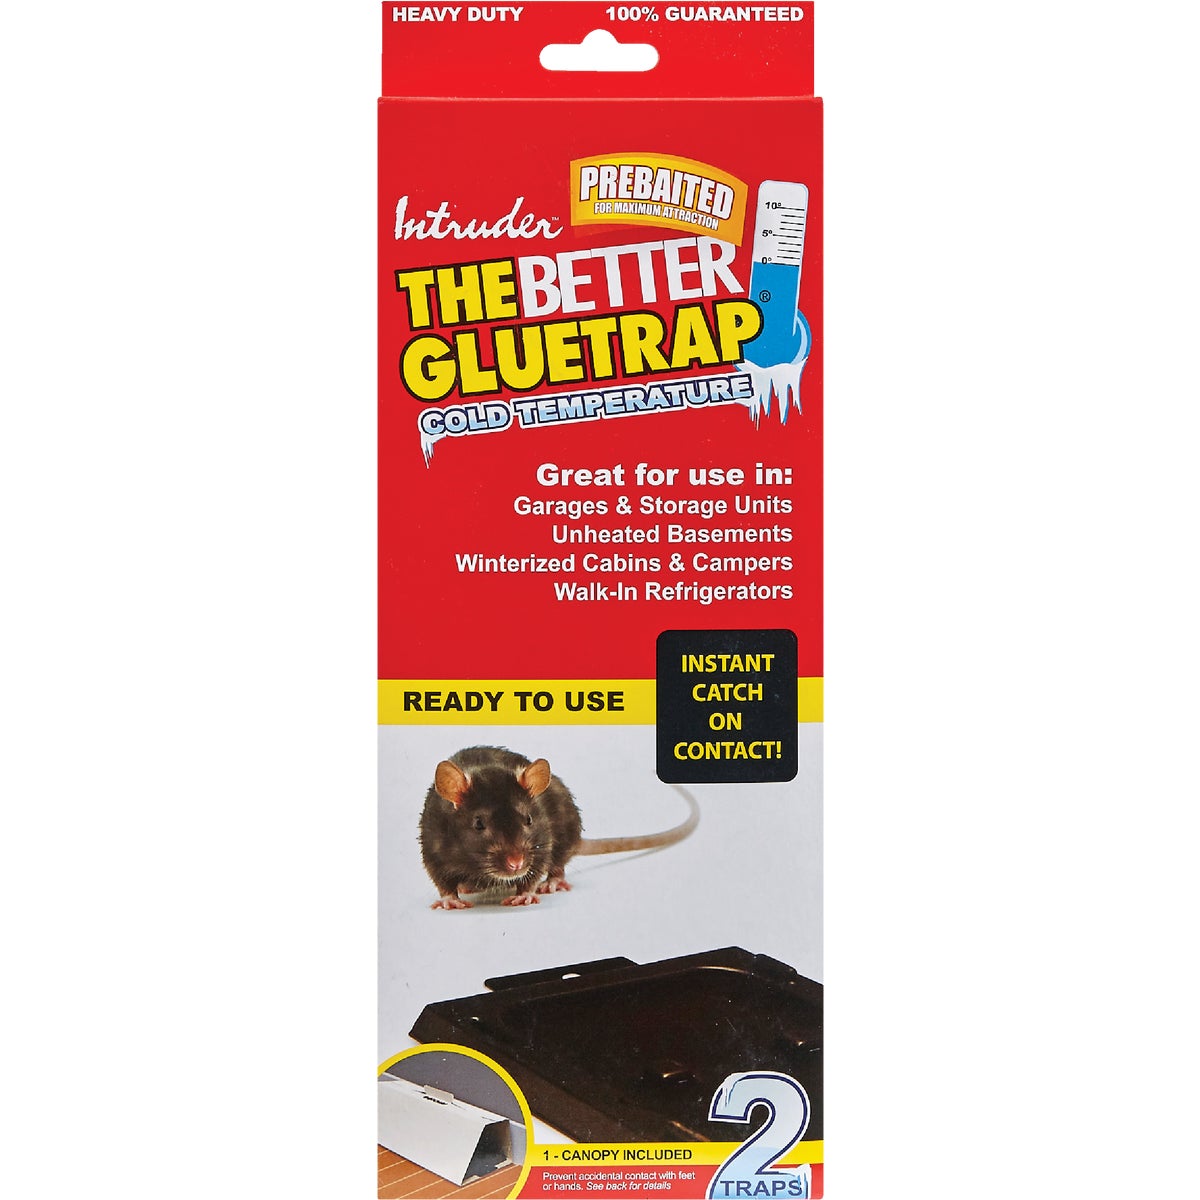 Item 702453, Specially formulated large rat, mouse and snake glue trap.